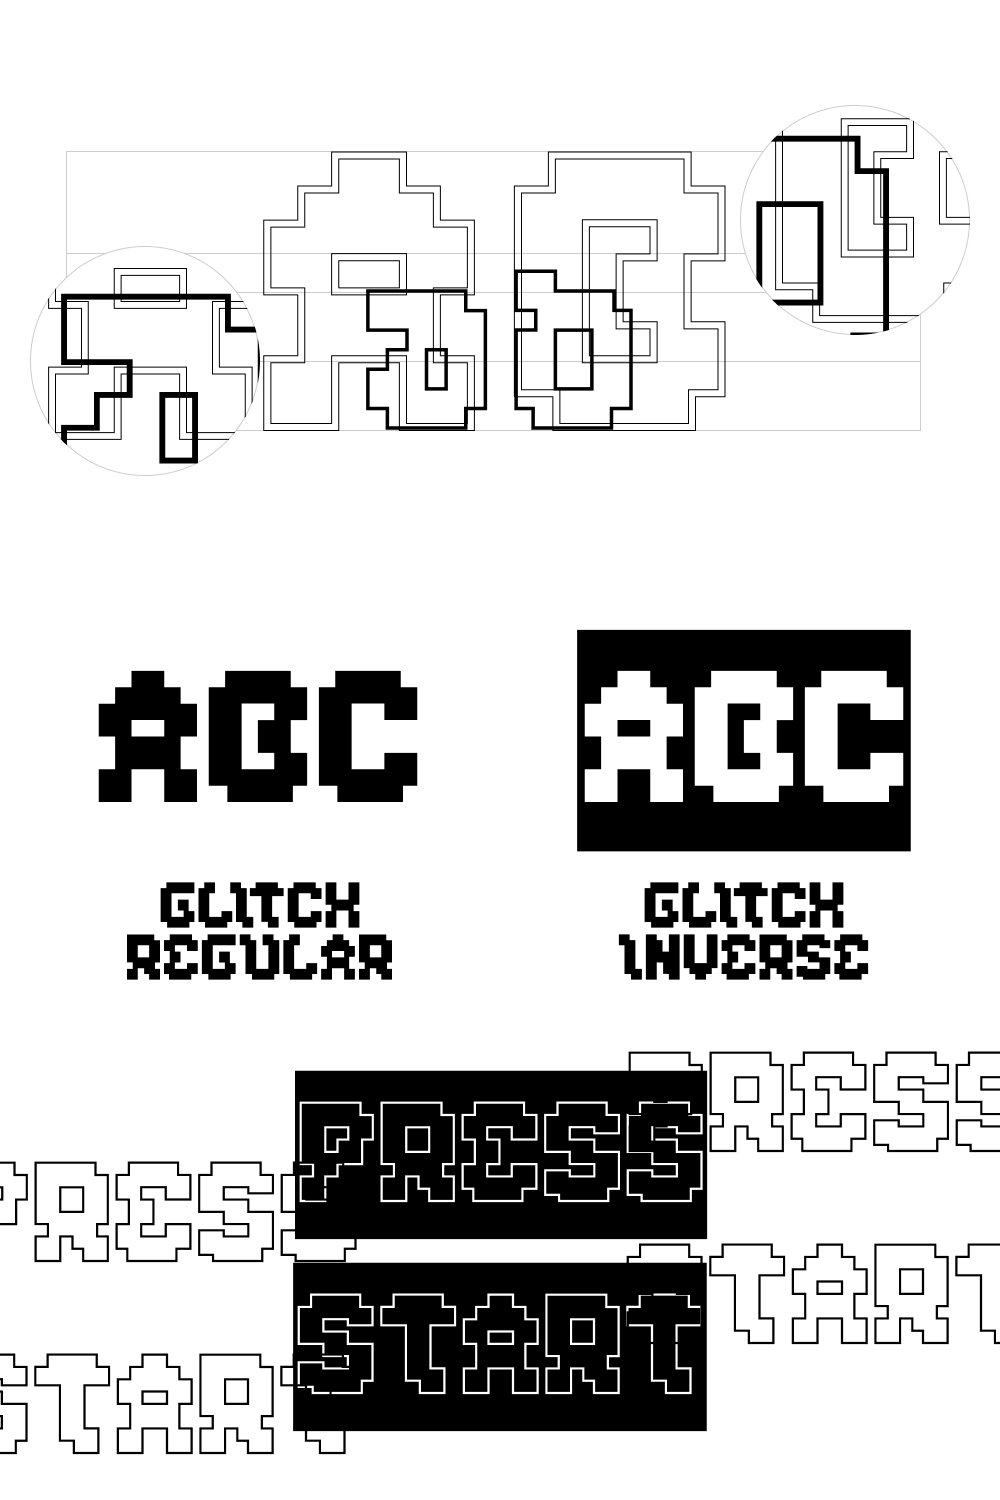 Two styles of glitch font.